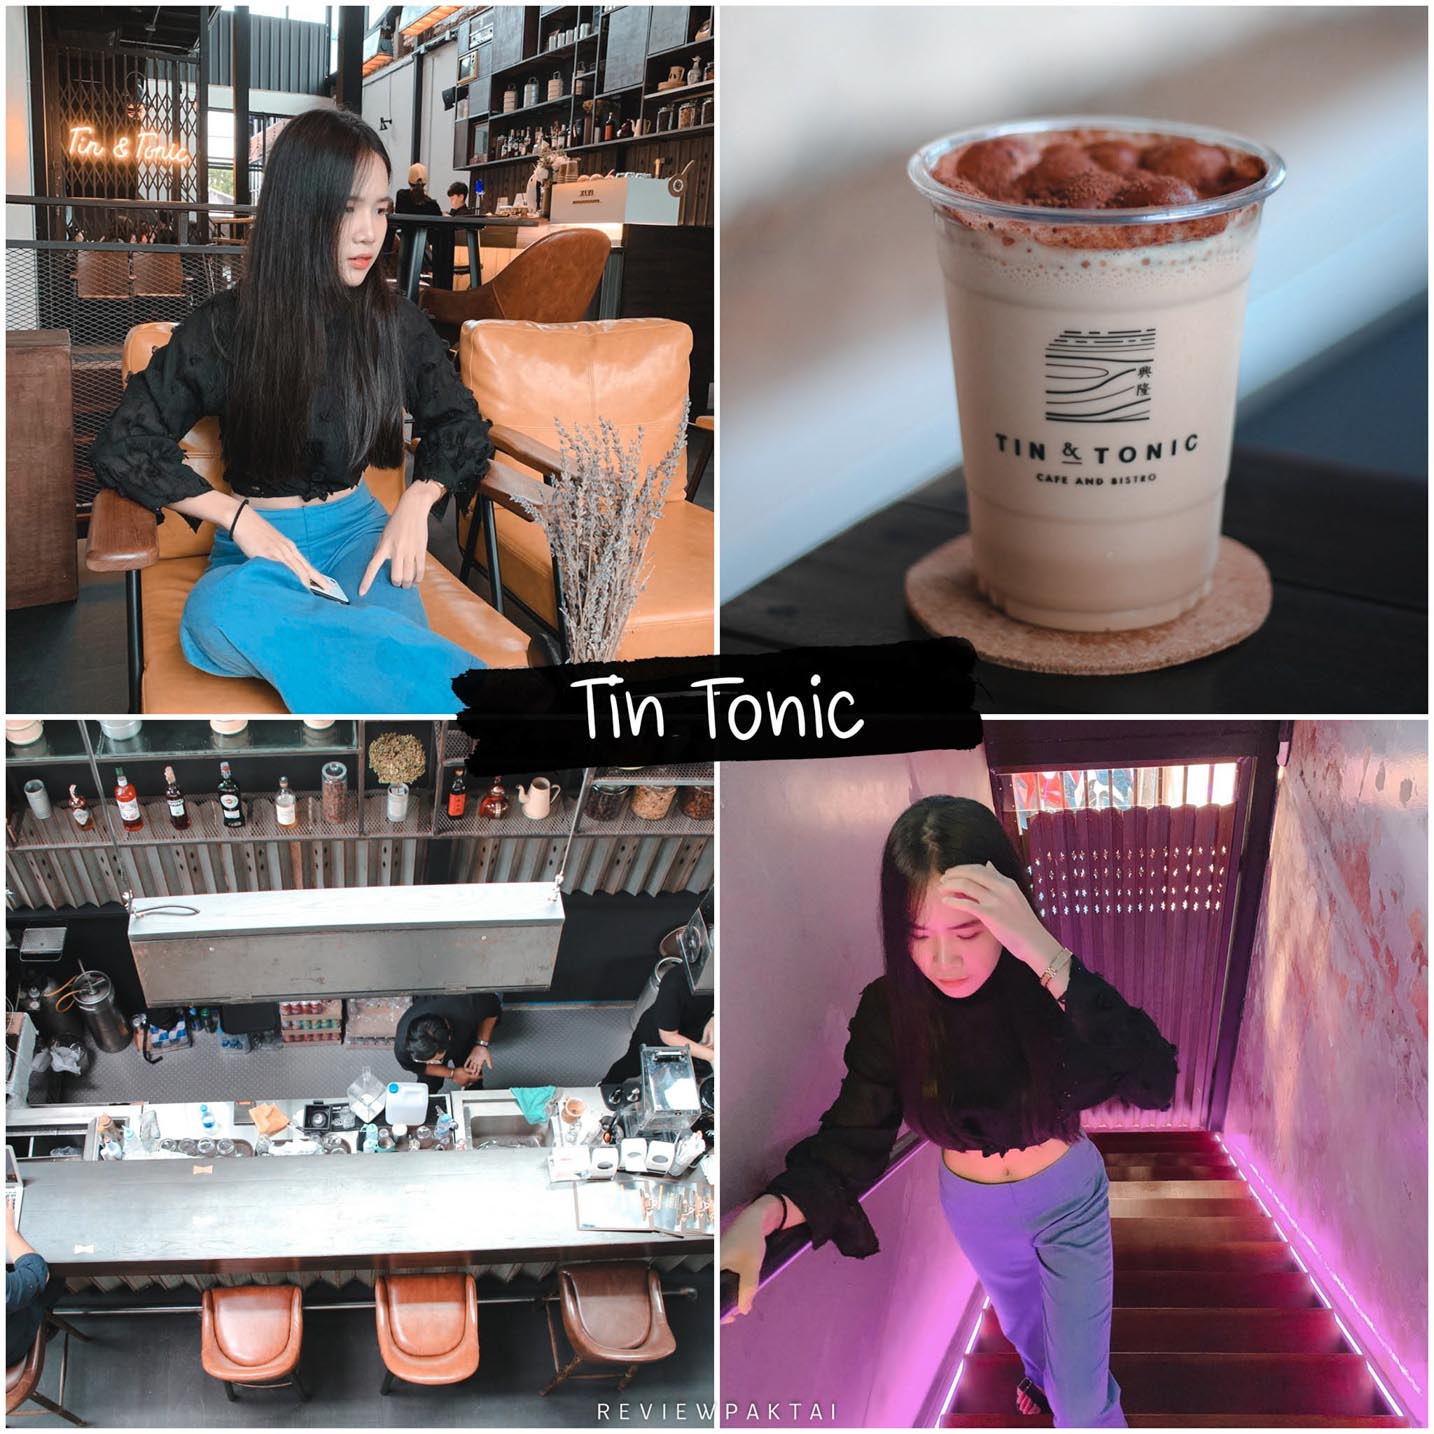 Tin & Tonic Cafe Phuket, guaranteed you won't be disappointed. Take beautiful, chic, unique photos. Can I not go to check-in?